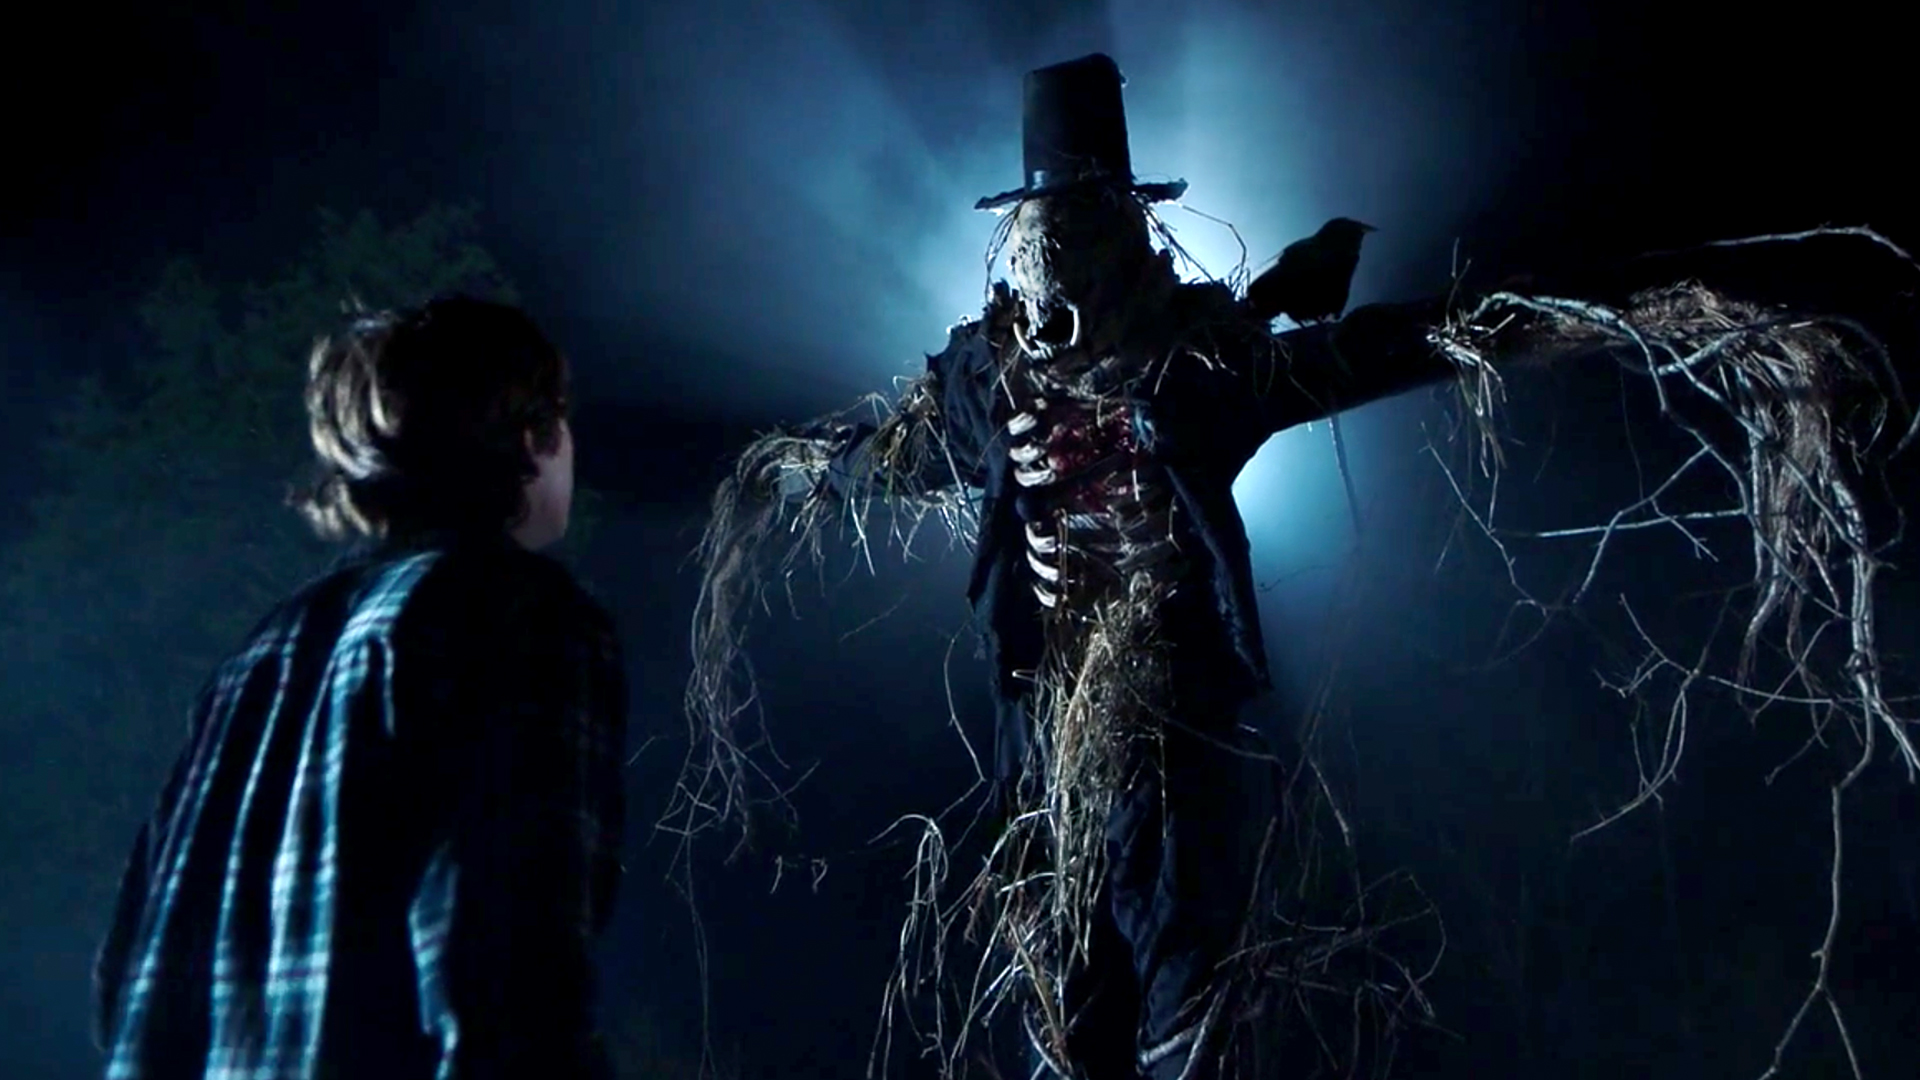 The Companion / Lydia Layne's Better Half, Harry finds a scarecrow. Lydia kills her lover., TV-MA, Season 1002296, Episode 4